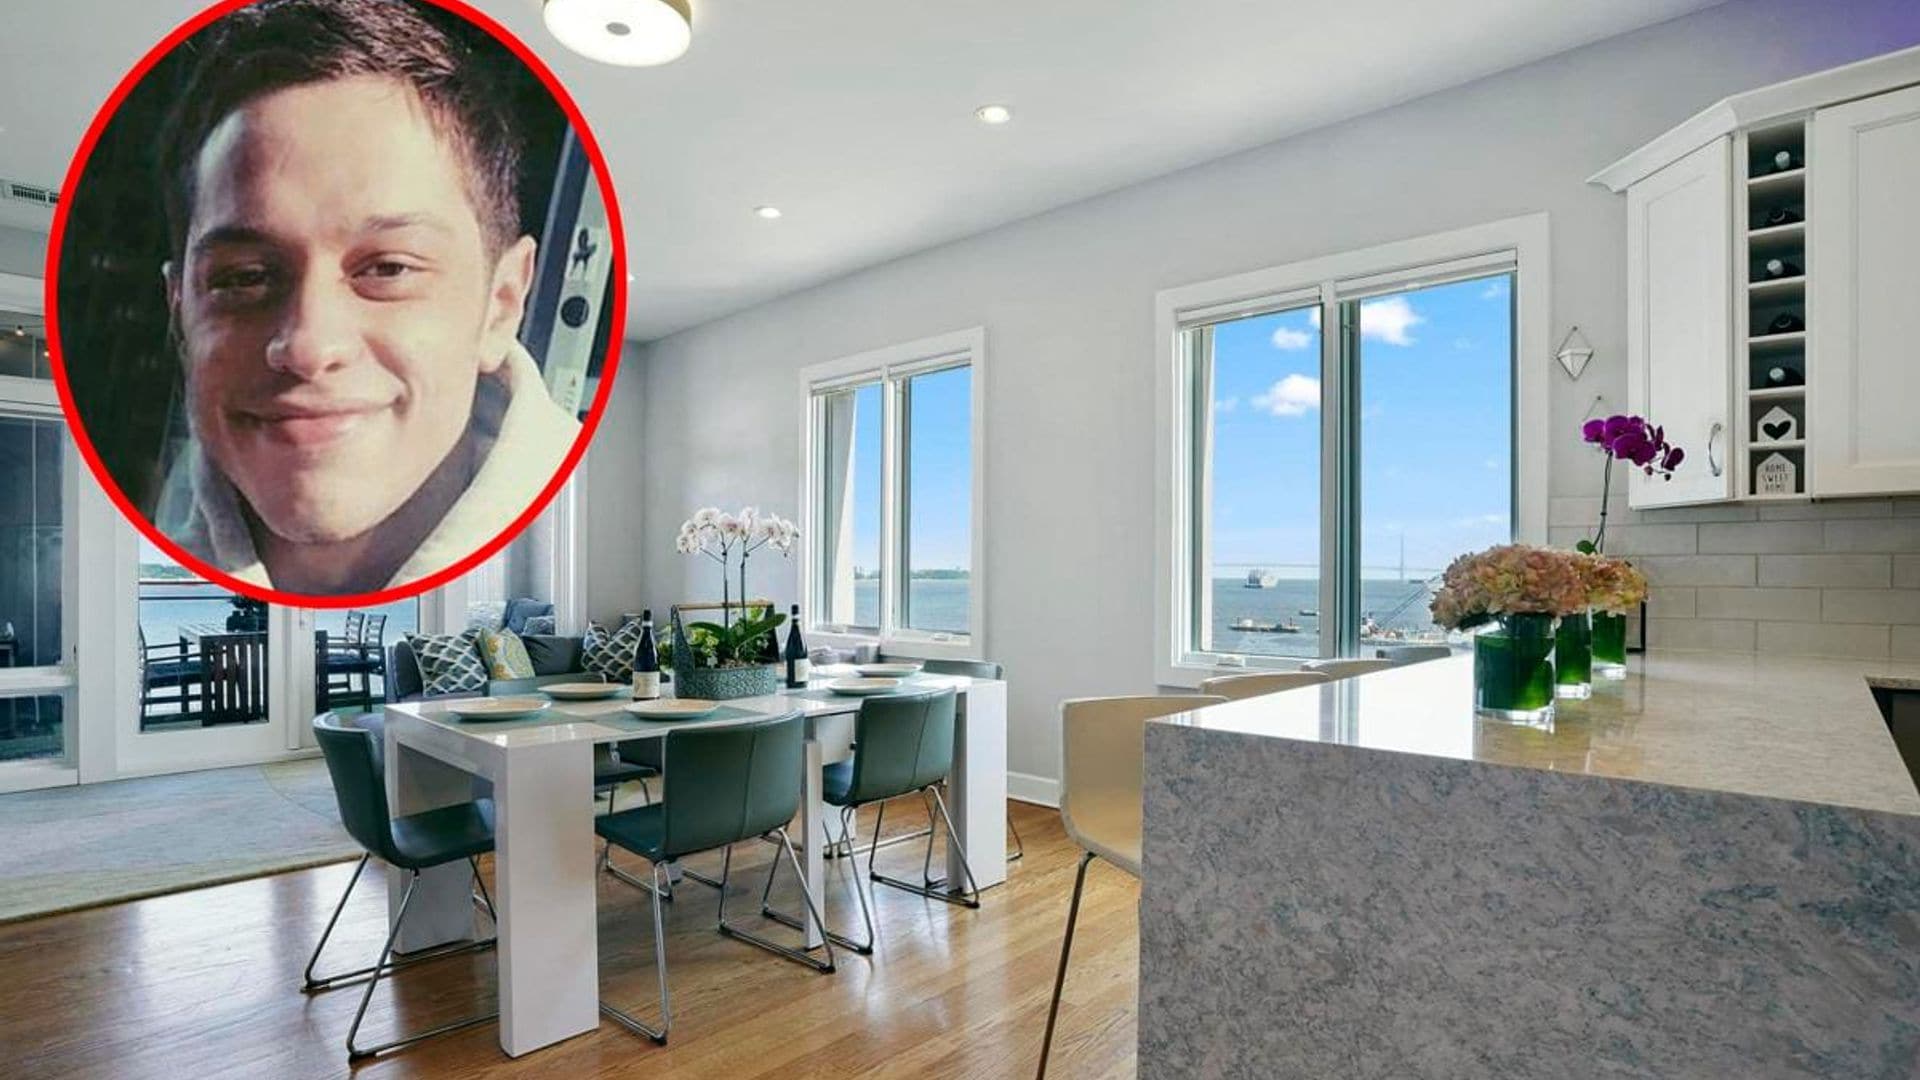 Pete Davidson is selling his Staten Island home for $1.3 million